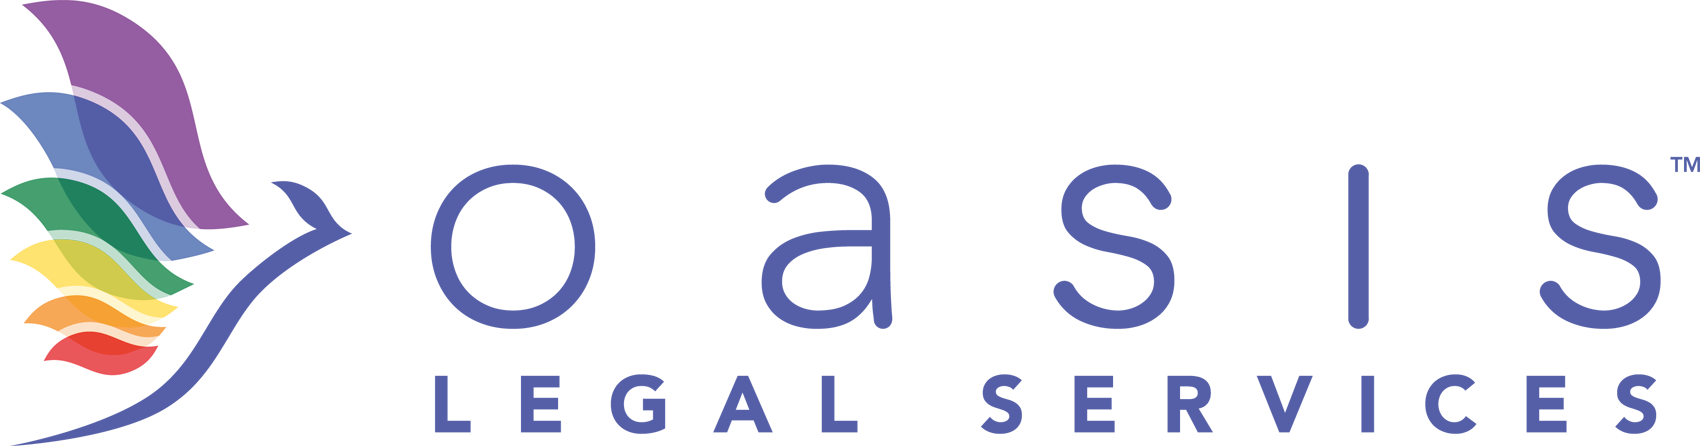 Oasis Legal